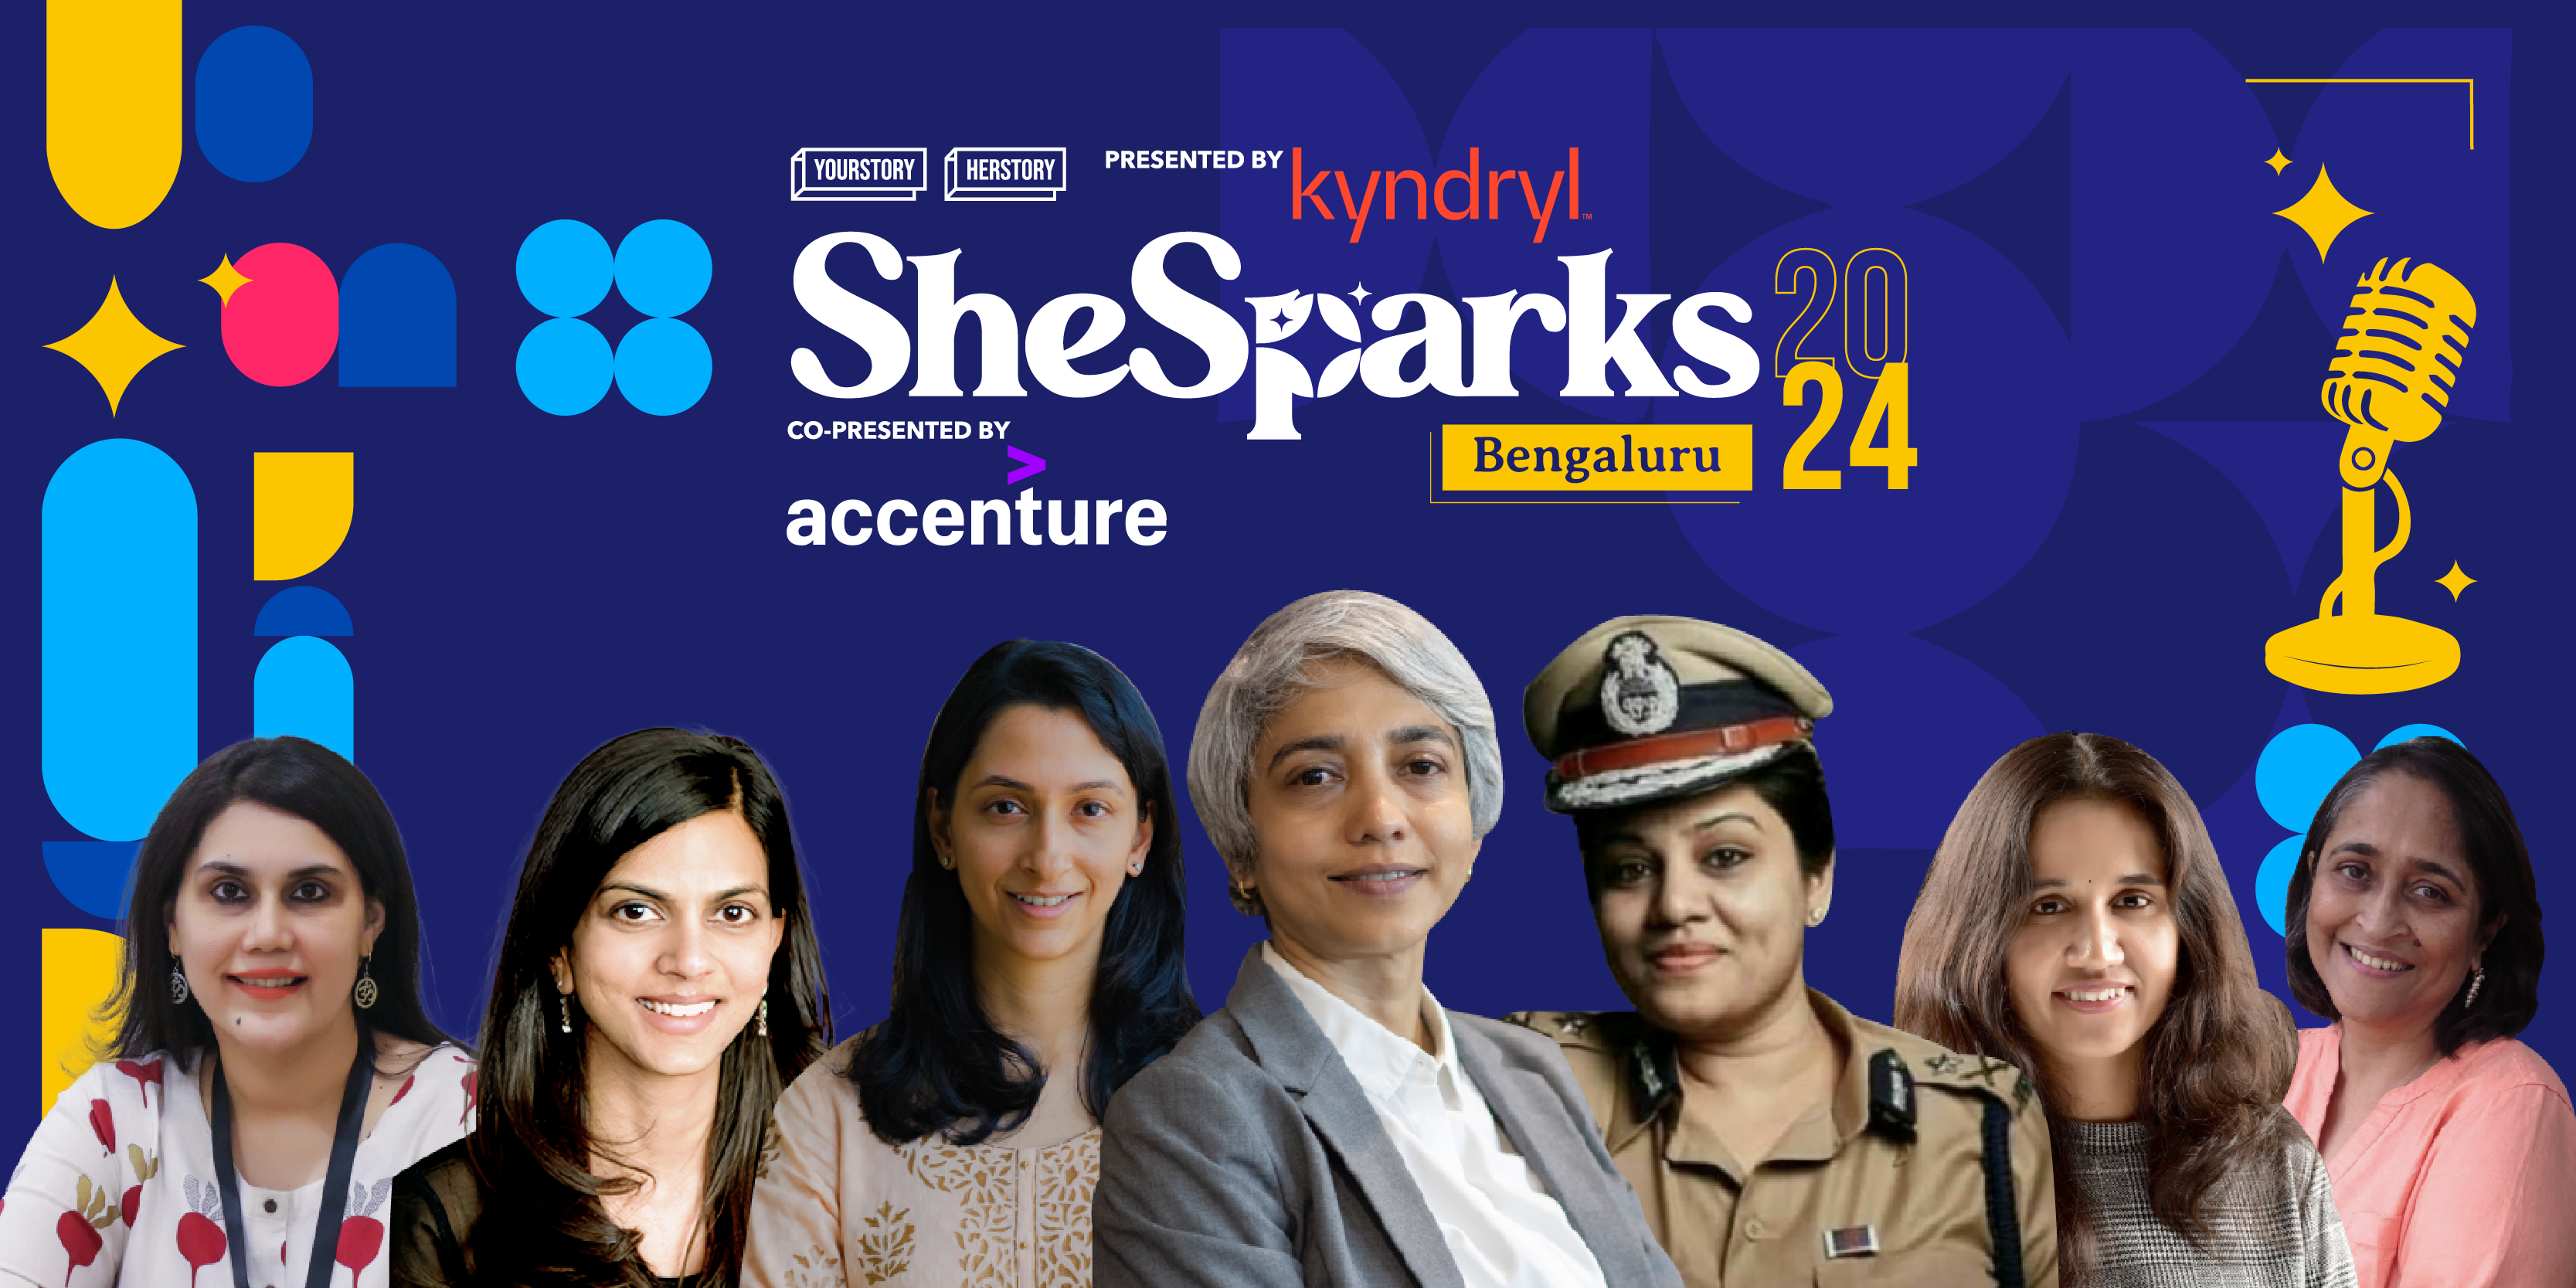 From Anisha Padukone to Ramkripa Ananthan: meet India’s most inspiring changemakers and leaders at SheSparks 2024